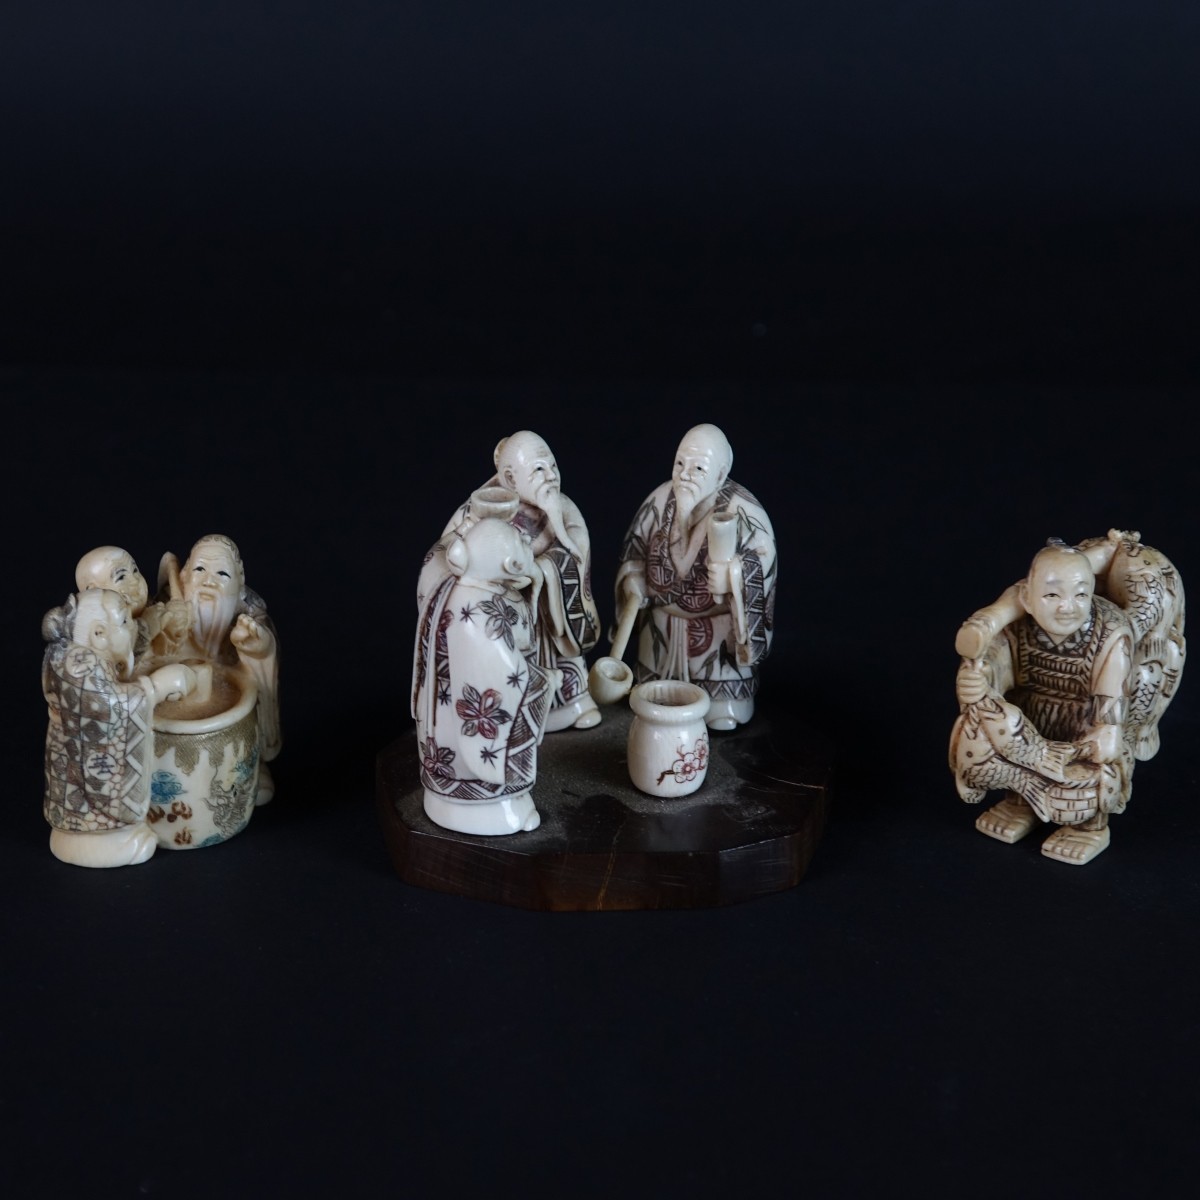 Three (3) Antique Japanese Carved Figurines